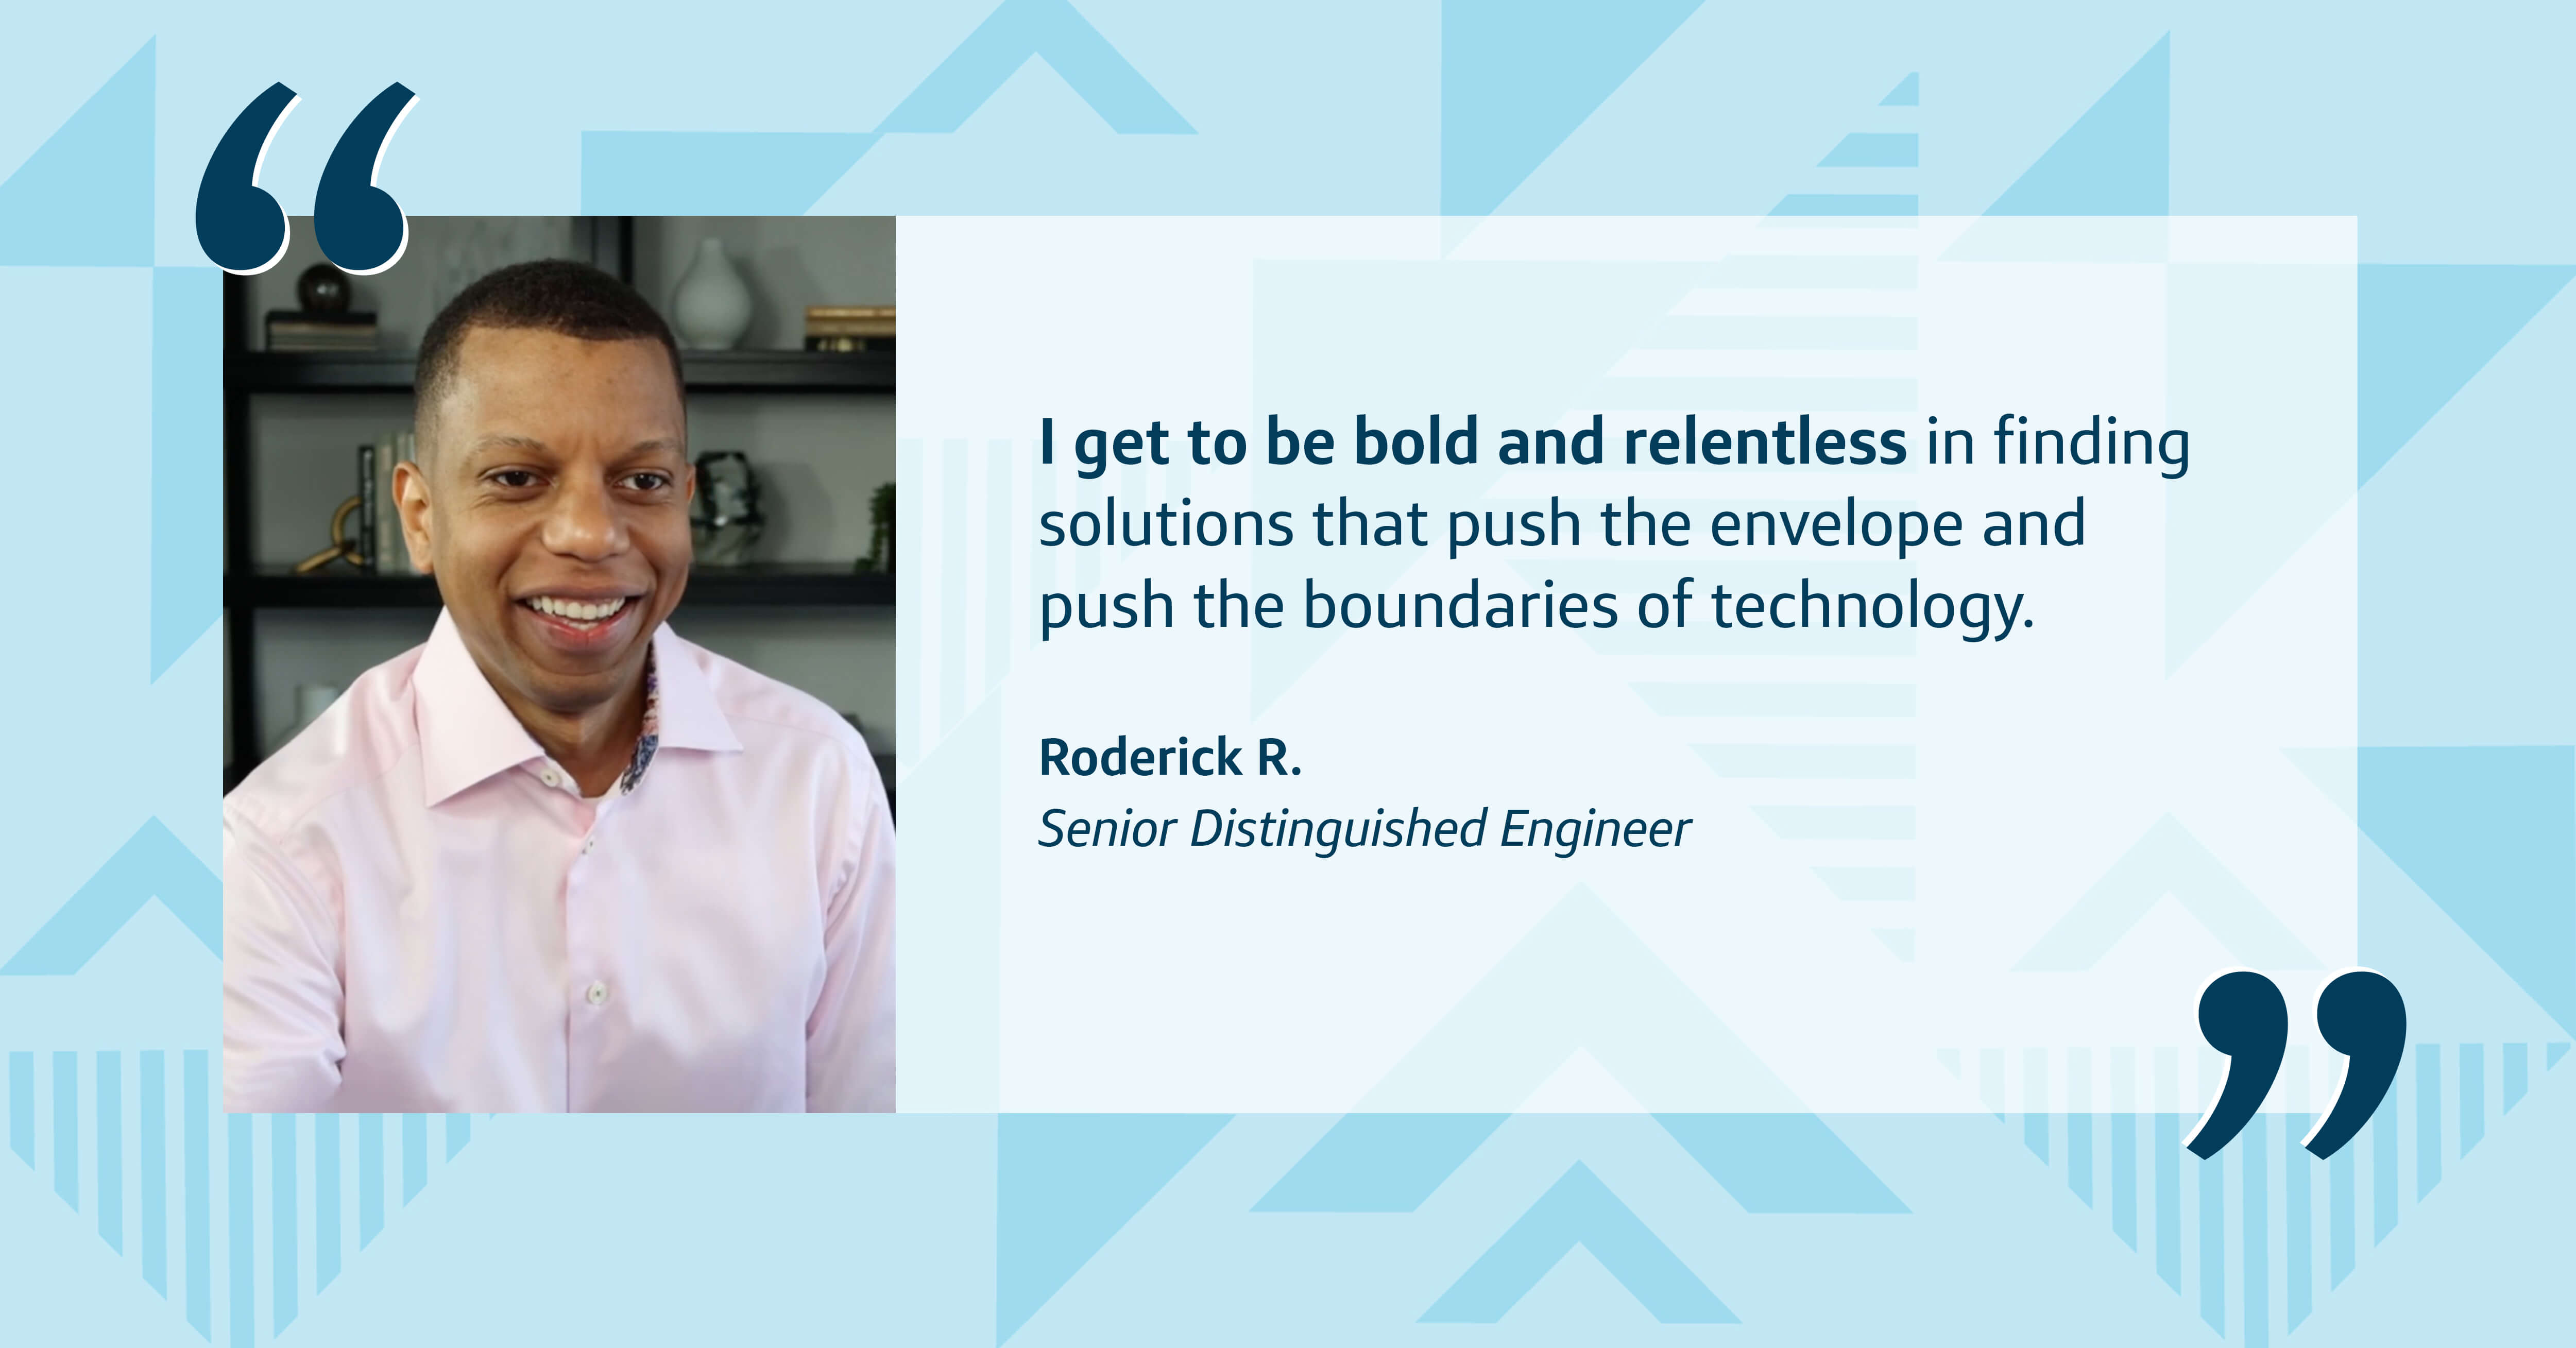 A picture of Capital One associate Roderick on top of a blue patterned background with a quote from him that says, “I get to be bold and relentless in finding solutions that push the envelope and push the boundaries of technology." - Roderick R., Senior Distinguished Engineer